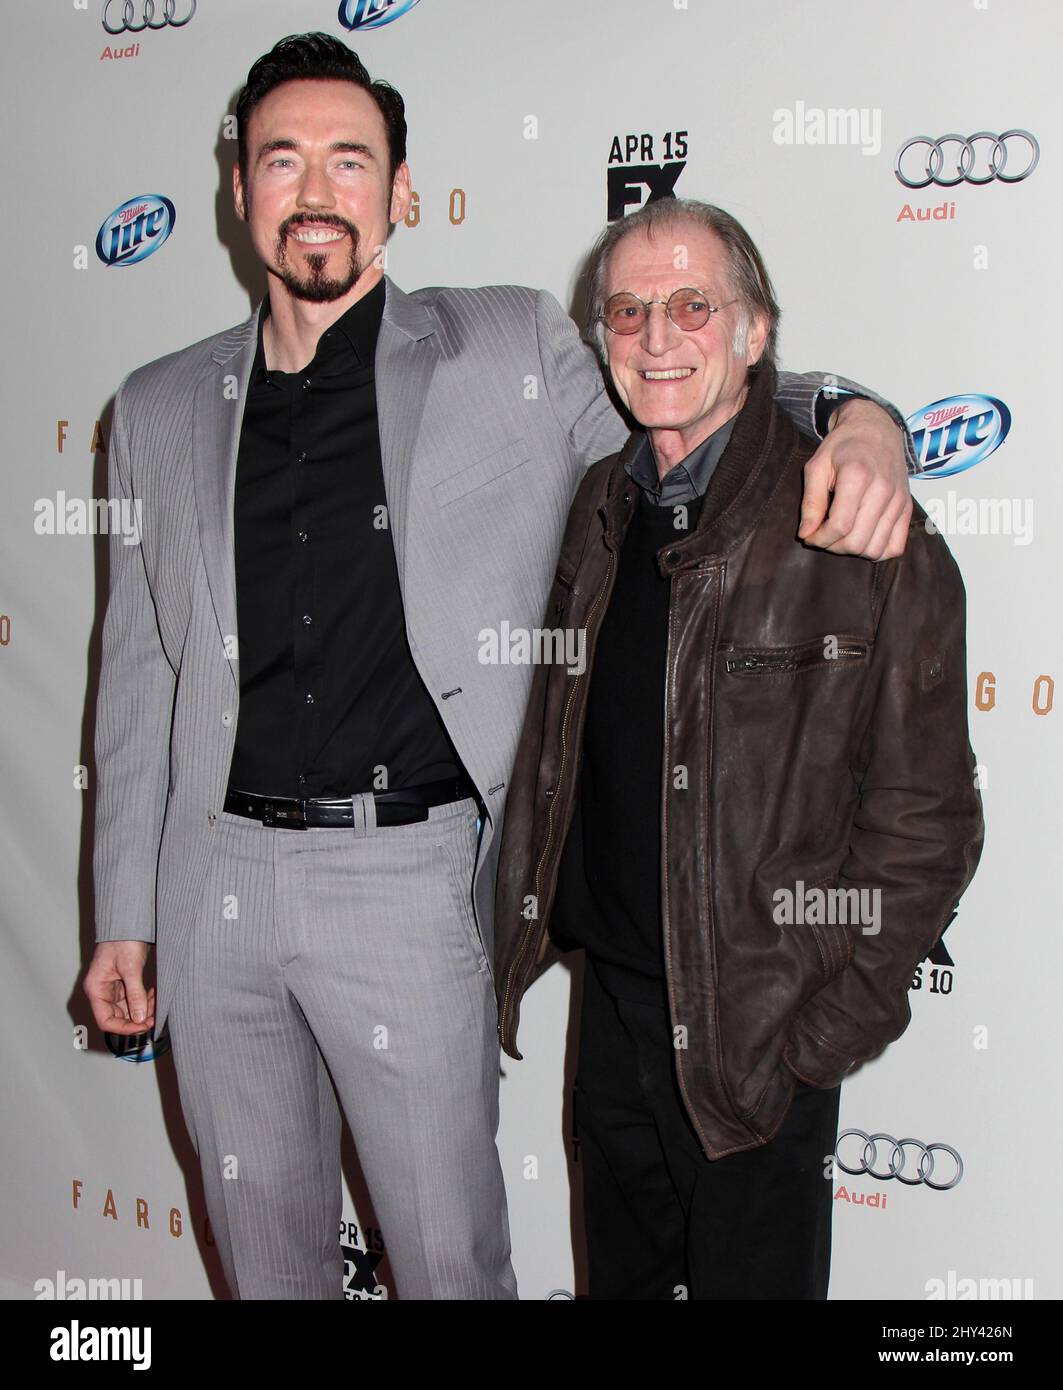 Kevin Durand and David Bradley attends the FX Networks Upfront premiere screening of 'Fargo' at the SVA Theater on Wednesday, April 9, 2014 in New York. Stock Photo